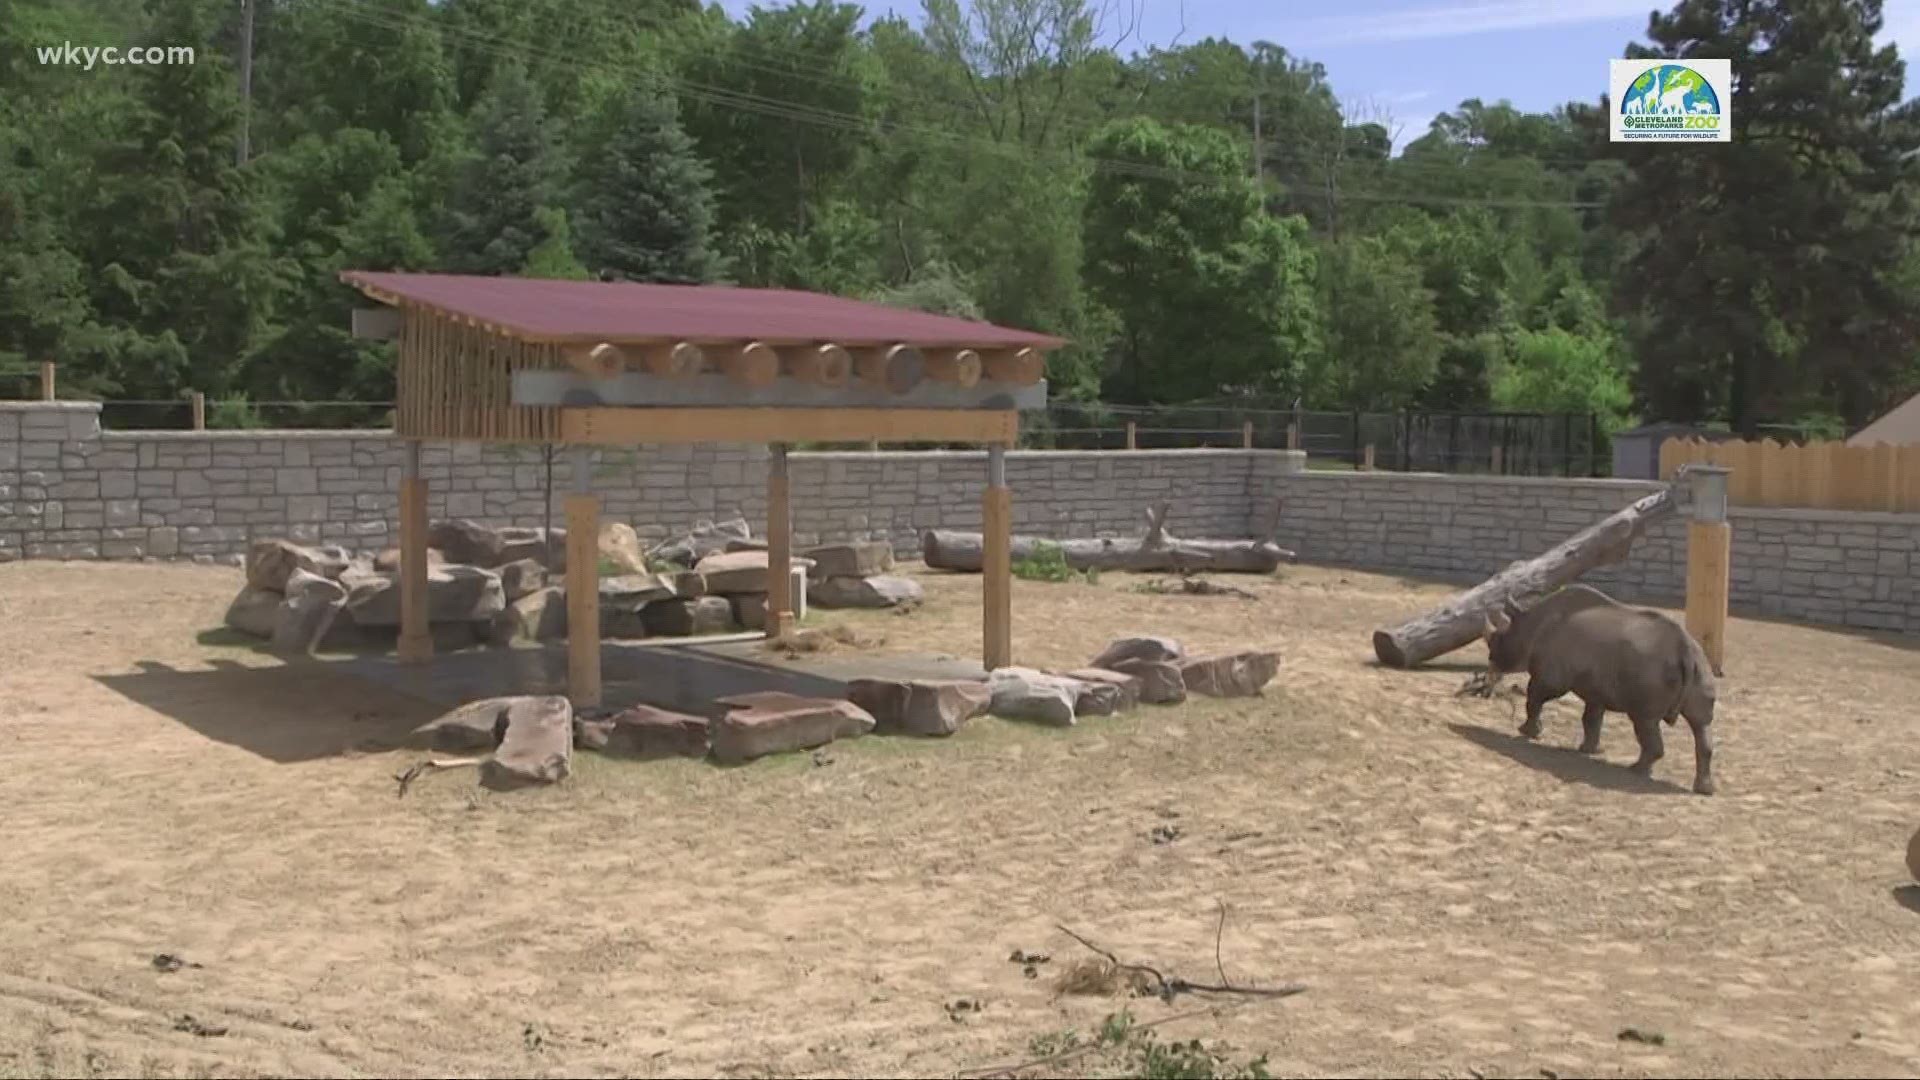 Cleveland Metroparks Zoo To Open Dinosaurs Around The World The